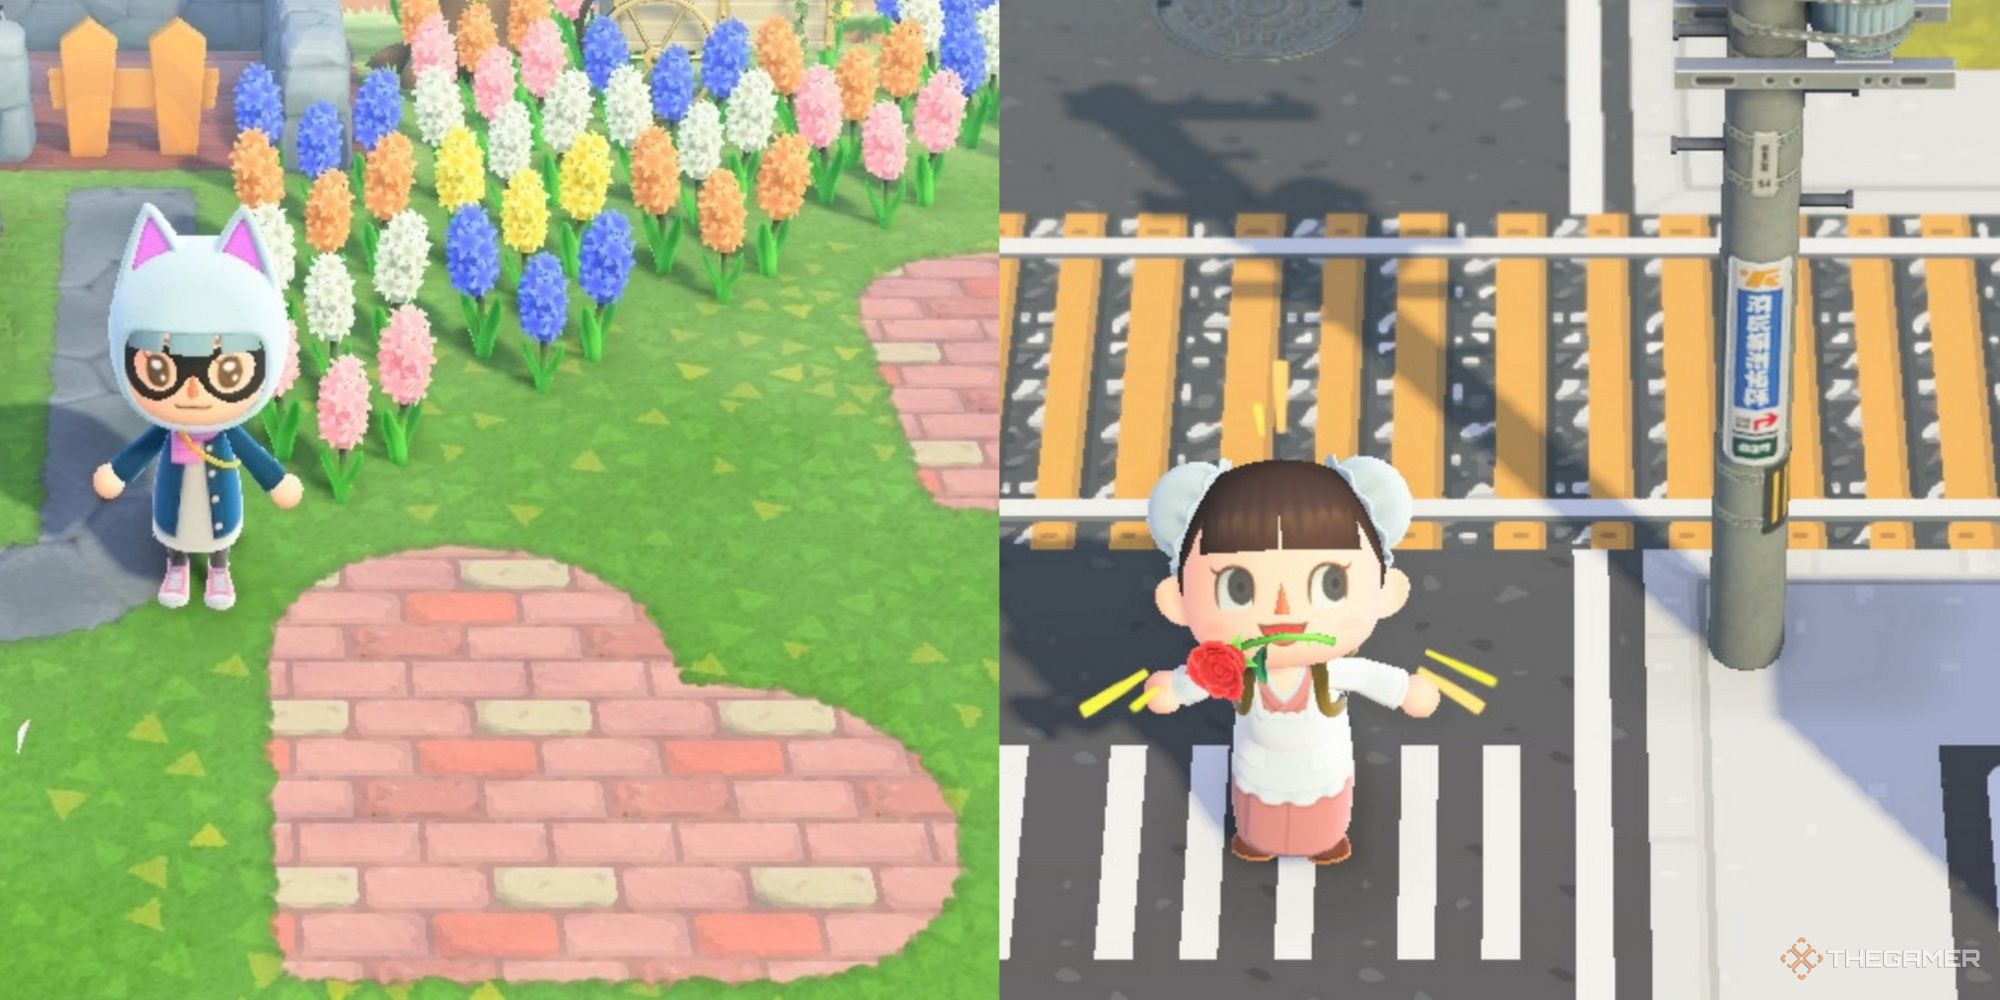 a villager wearing a cat mask by pink brick hearts, and a villager by train tracks acnh path codes